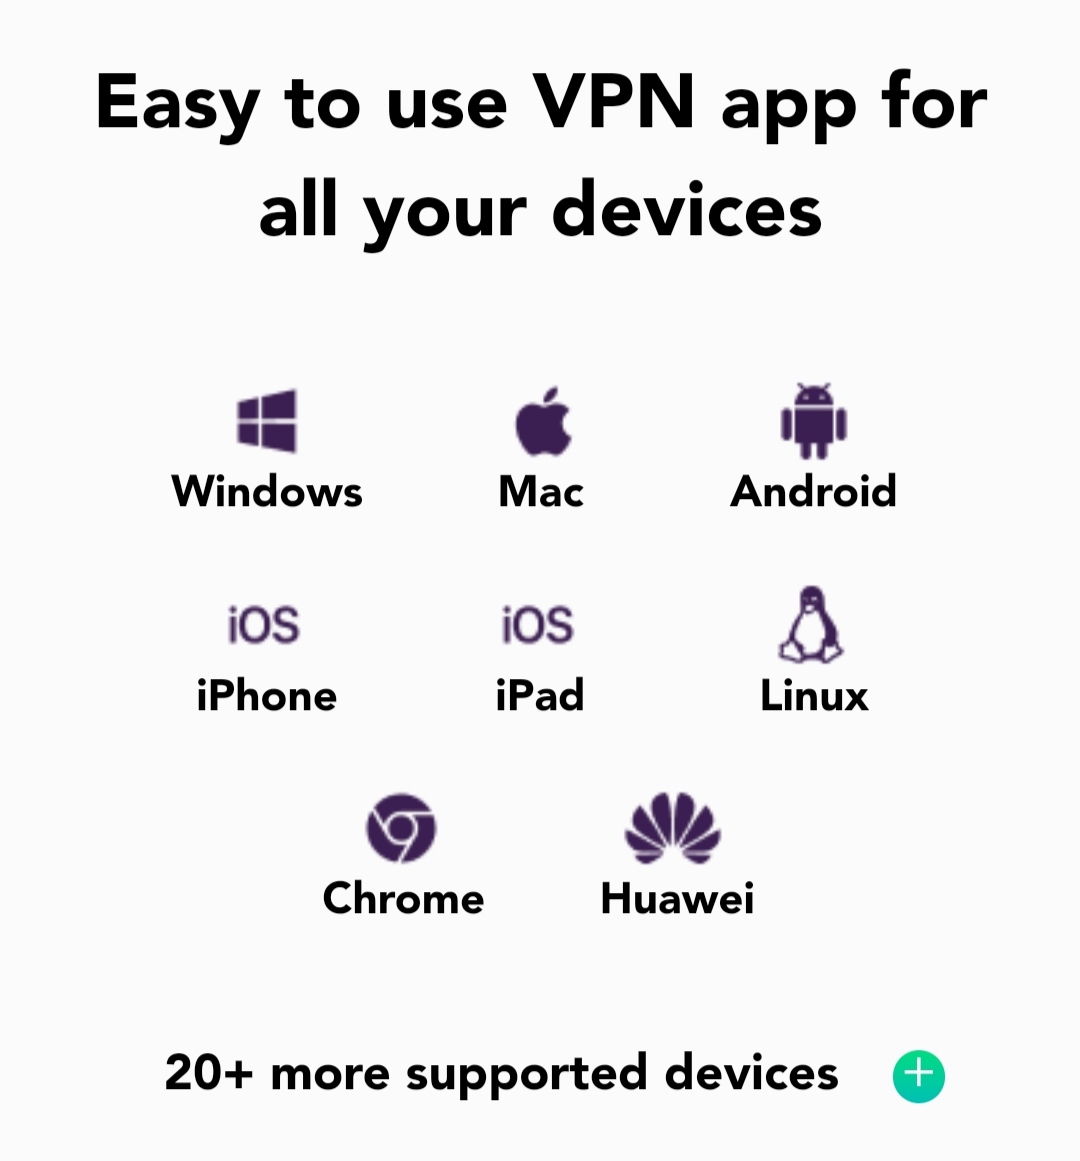 PureVpn Review Multiply the treasure better than other VPNs